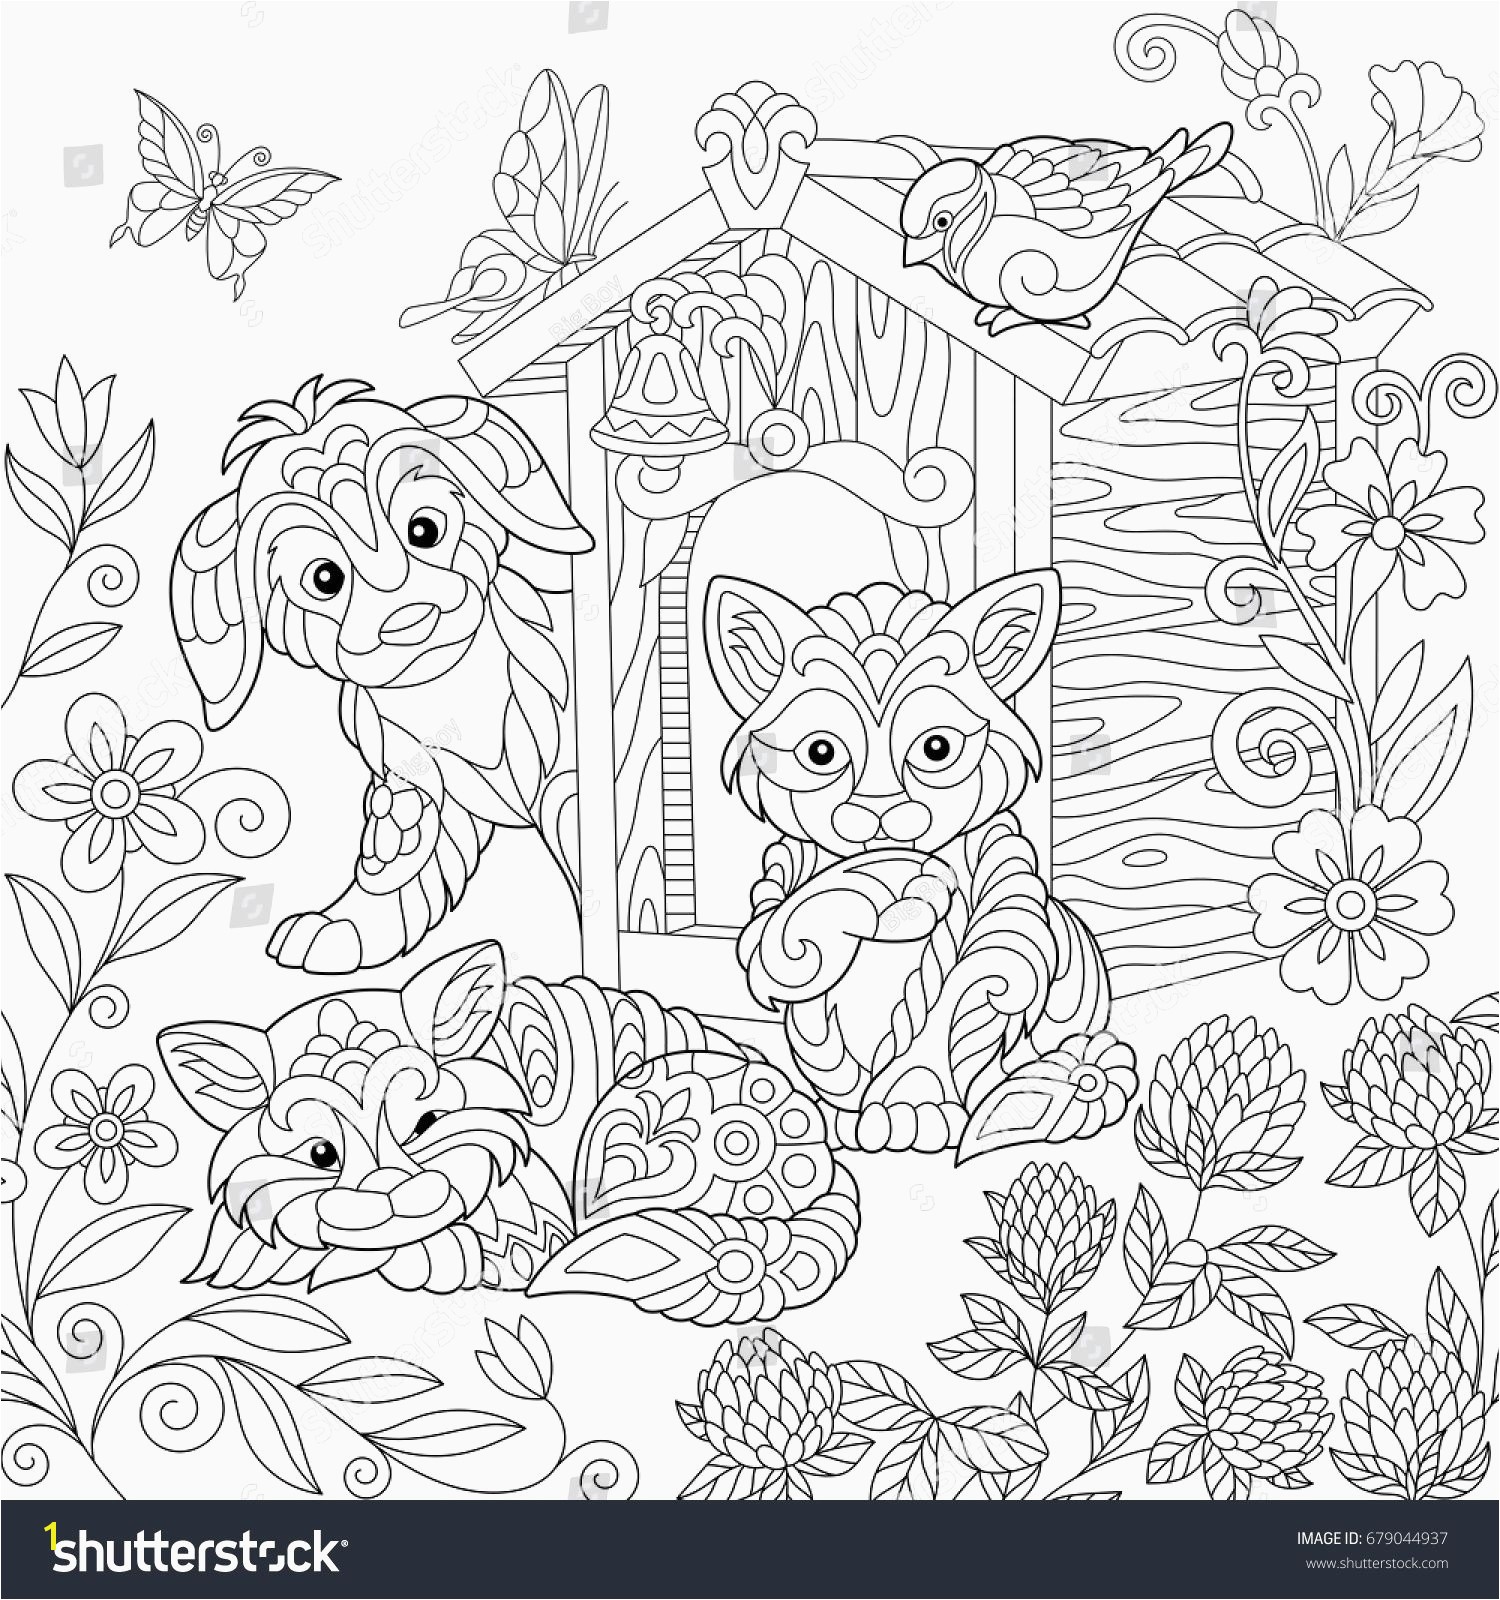 Printable Complex Animal Coloring Pages Free Full Size Coloring Pages Unique Full Page Printable Coloring